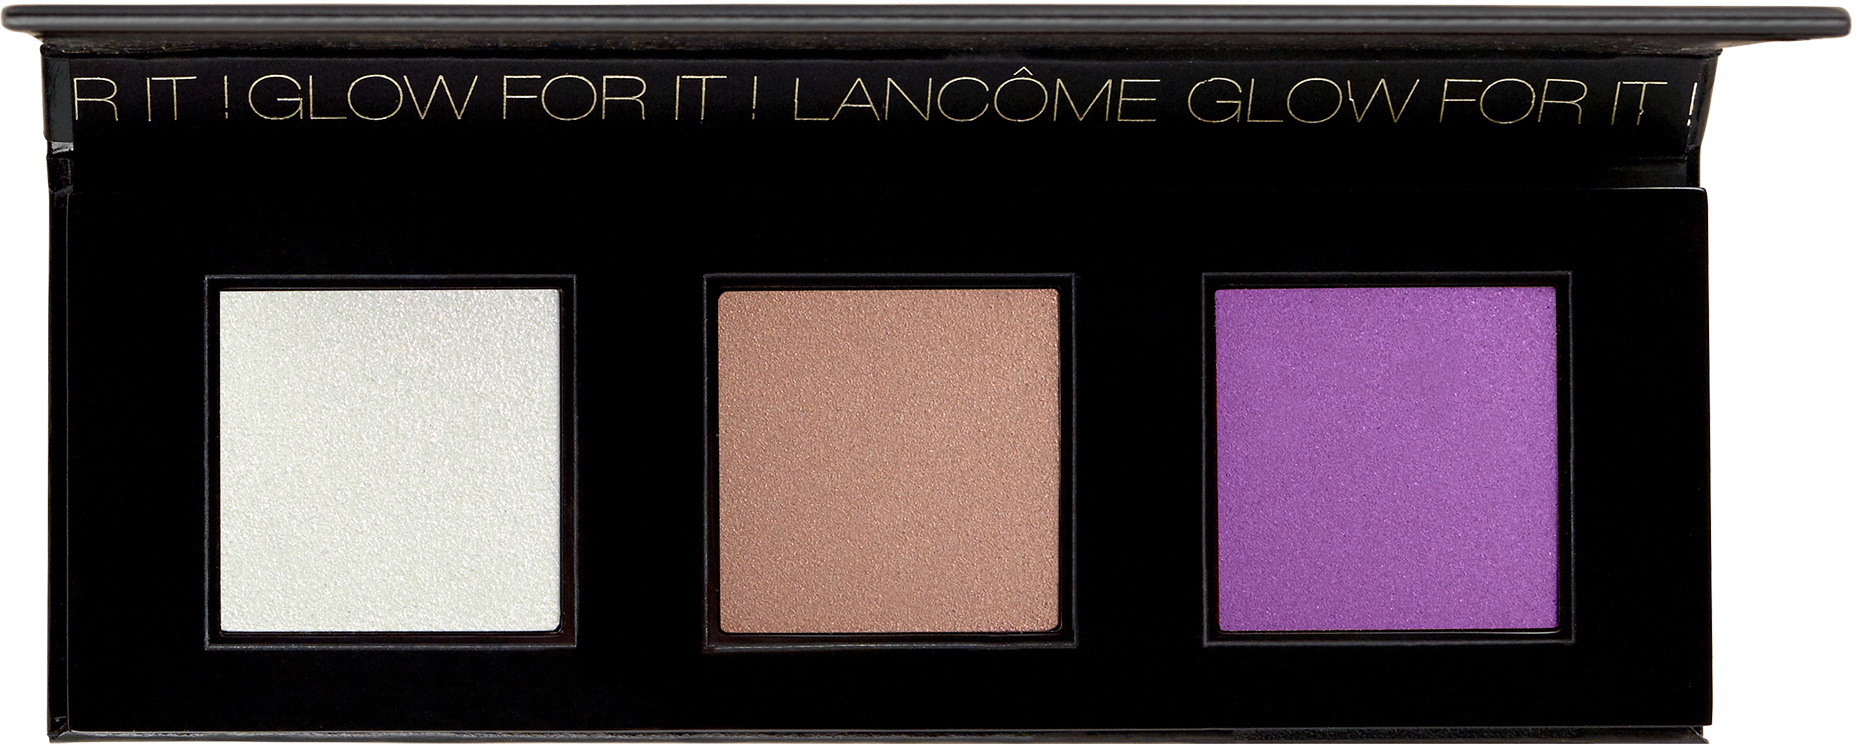 Lancôme Lancome Glow For It Highlighter Palette - 04 Amenthyst Radiance